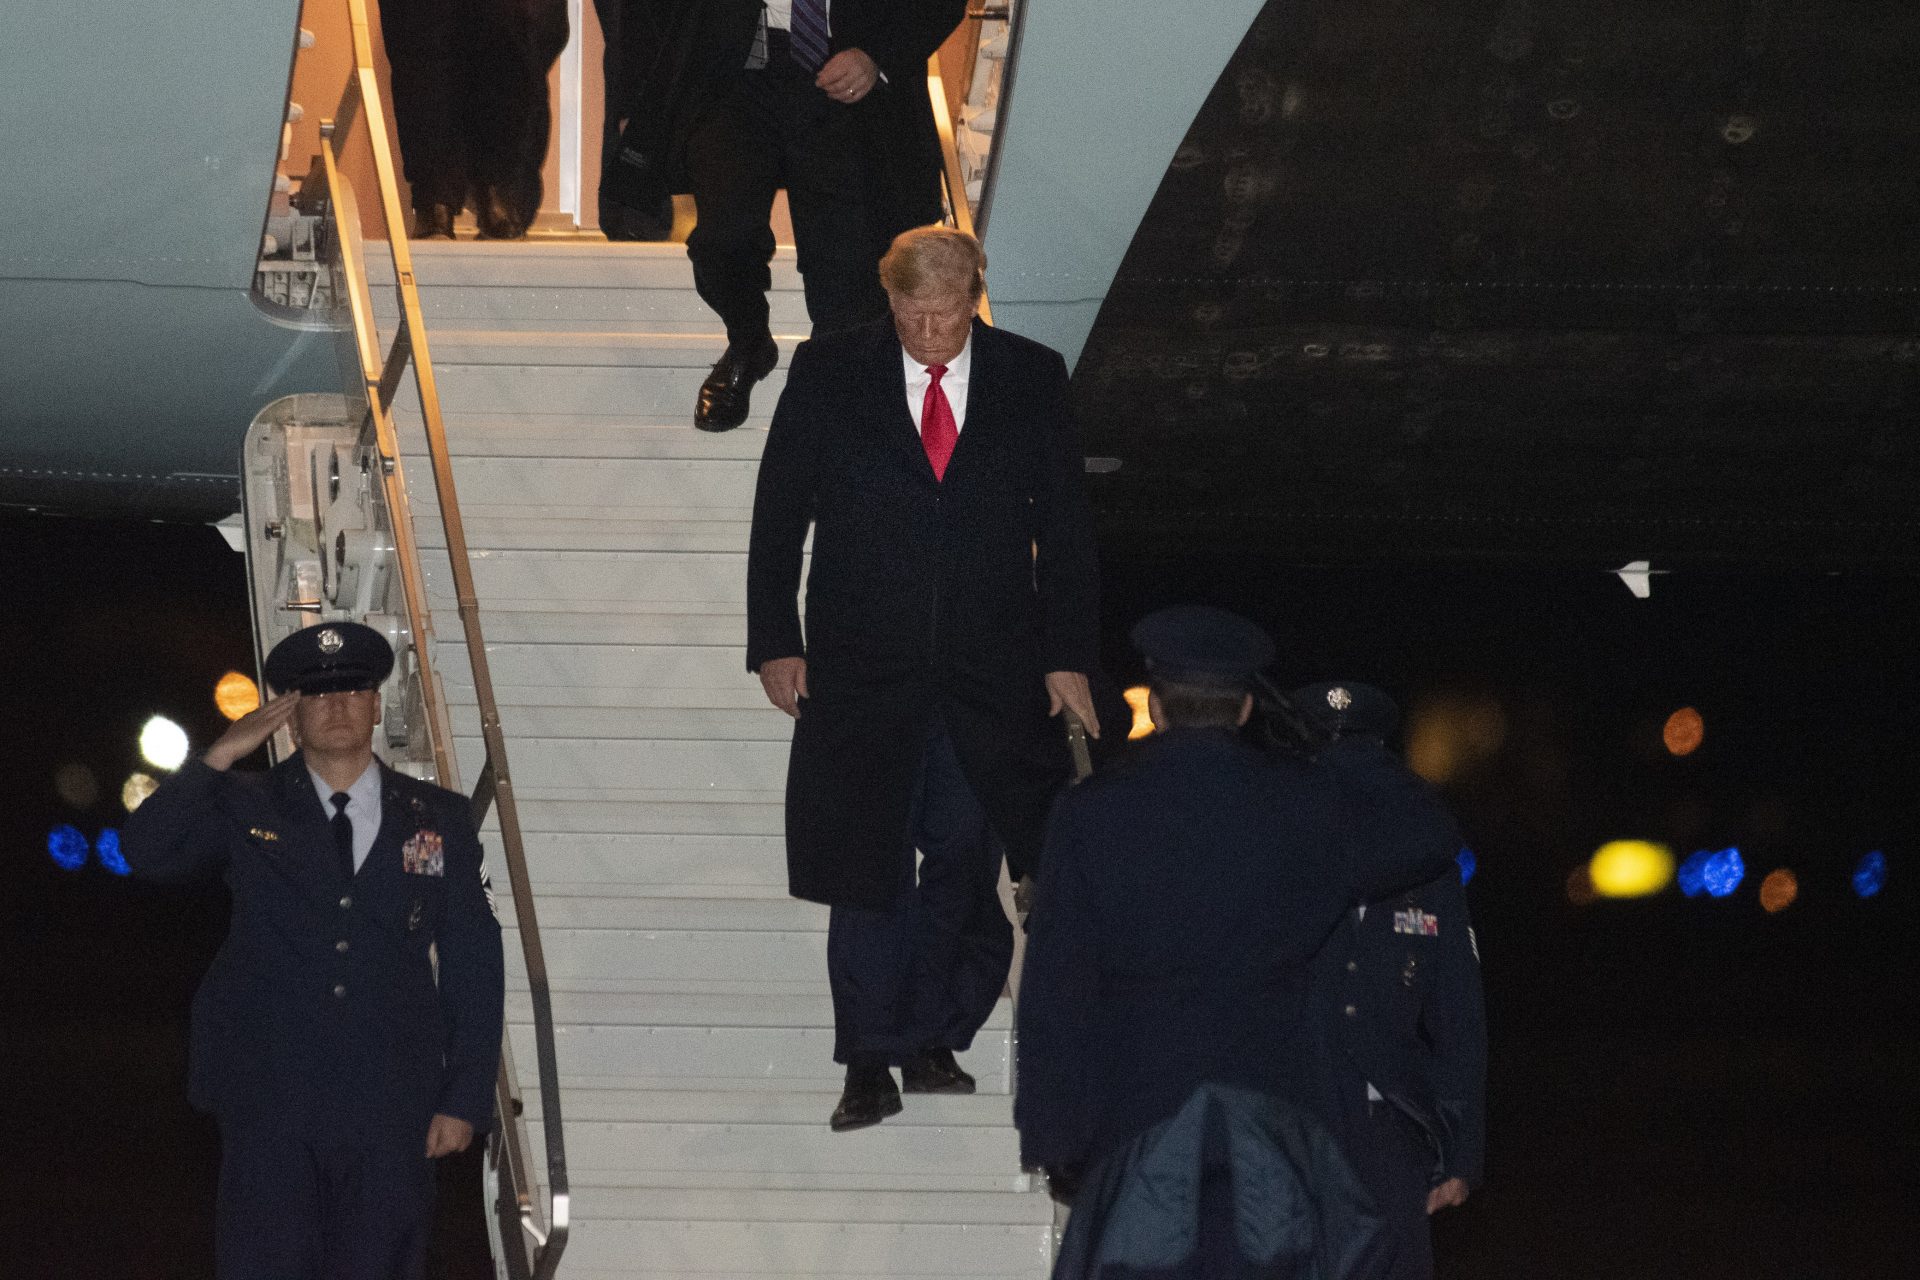 President Donald Trump exits Air Force One, Saturday, Dec. 14, 2019, at Andrews Air Force Base, Md., following a trip to Philadelphia to attend the Army-Navy football game.